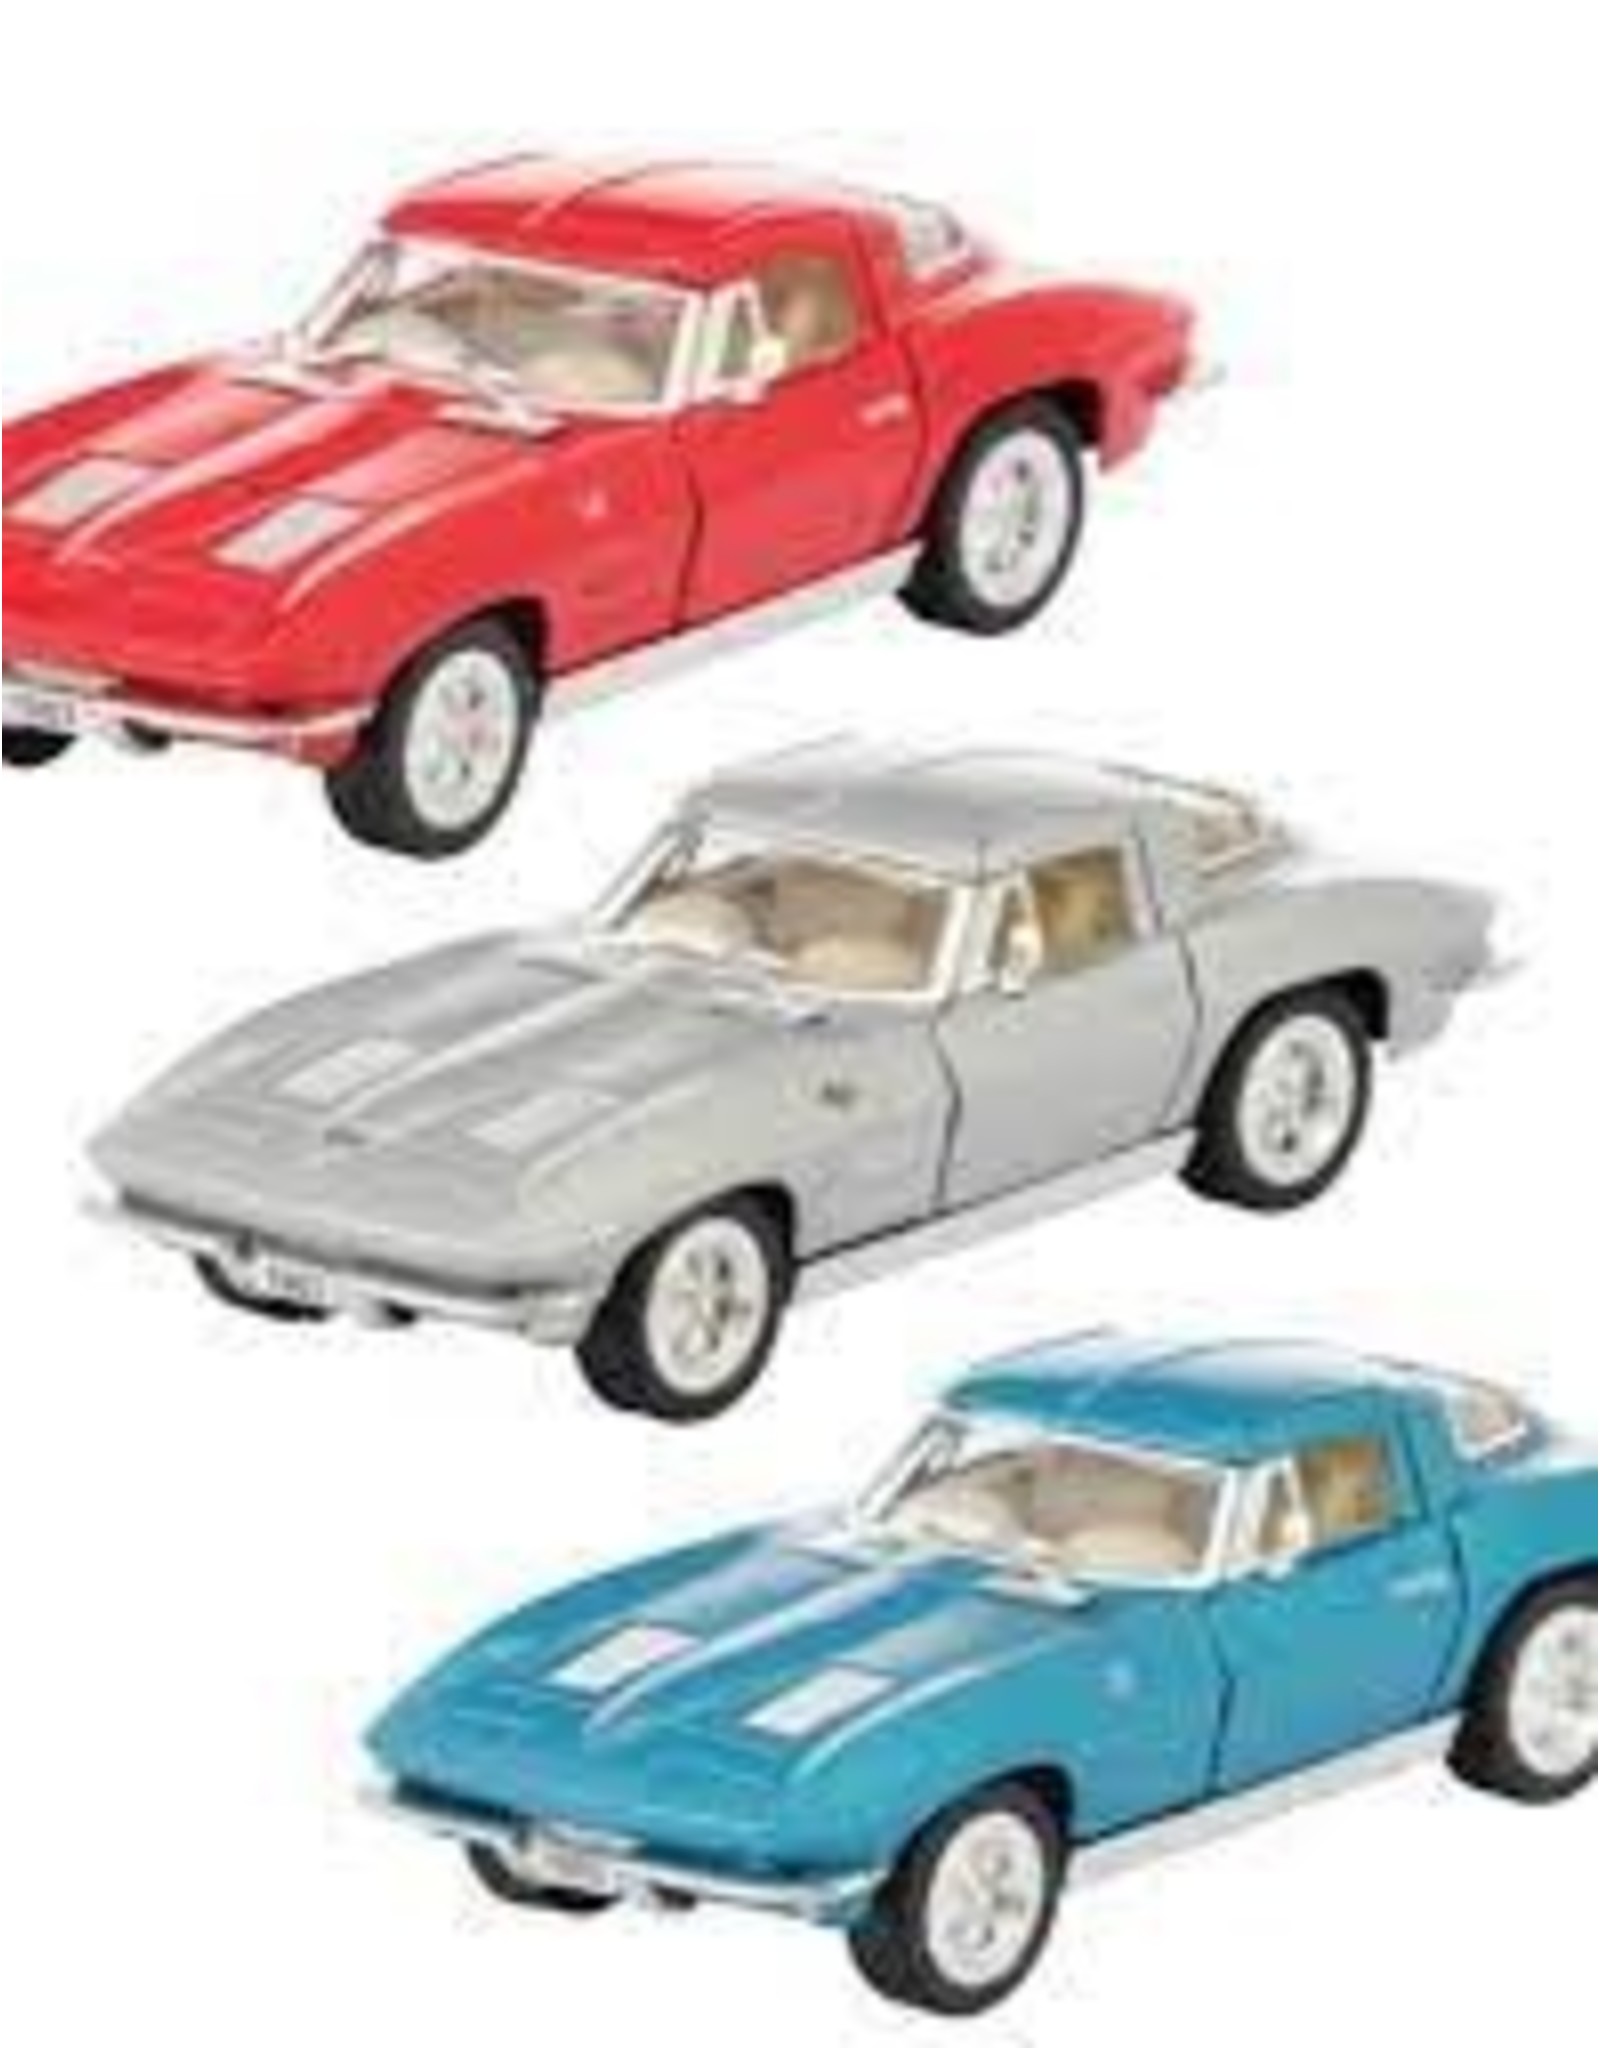 Die Cast 1963 Sting Ray  Silver